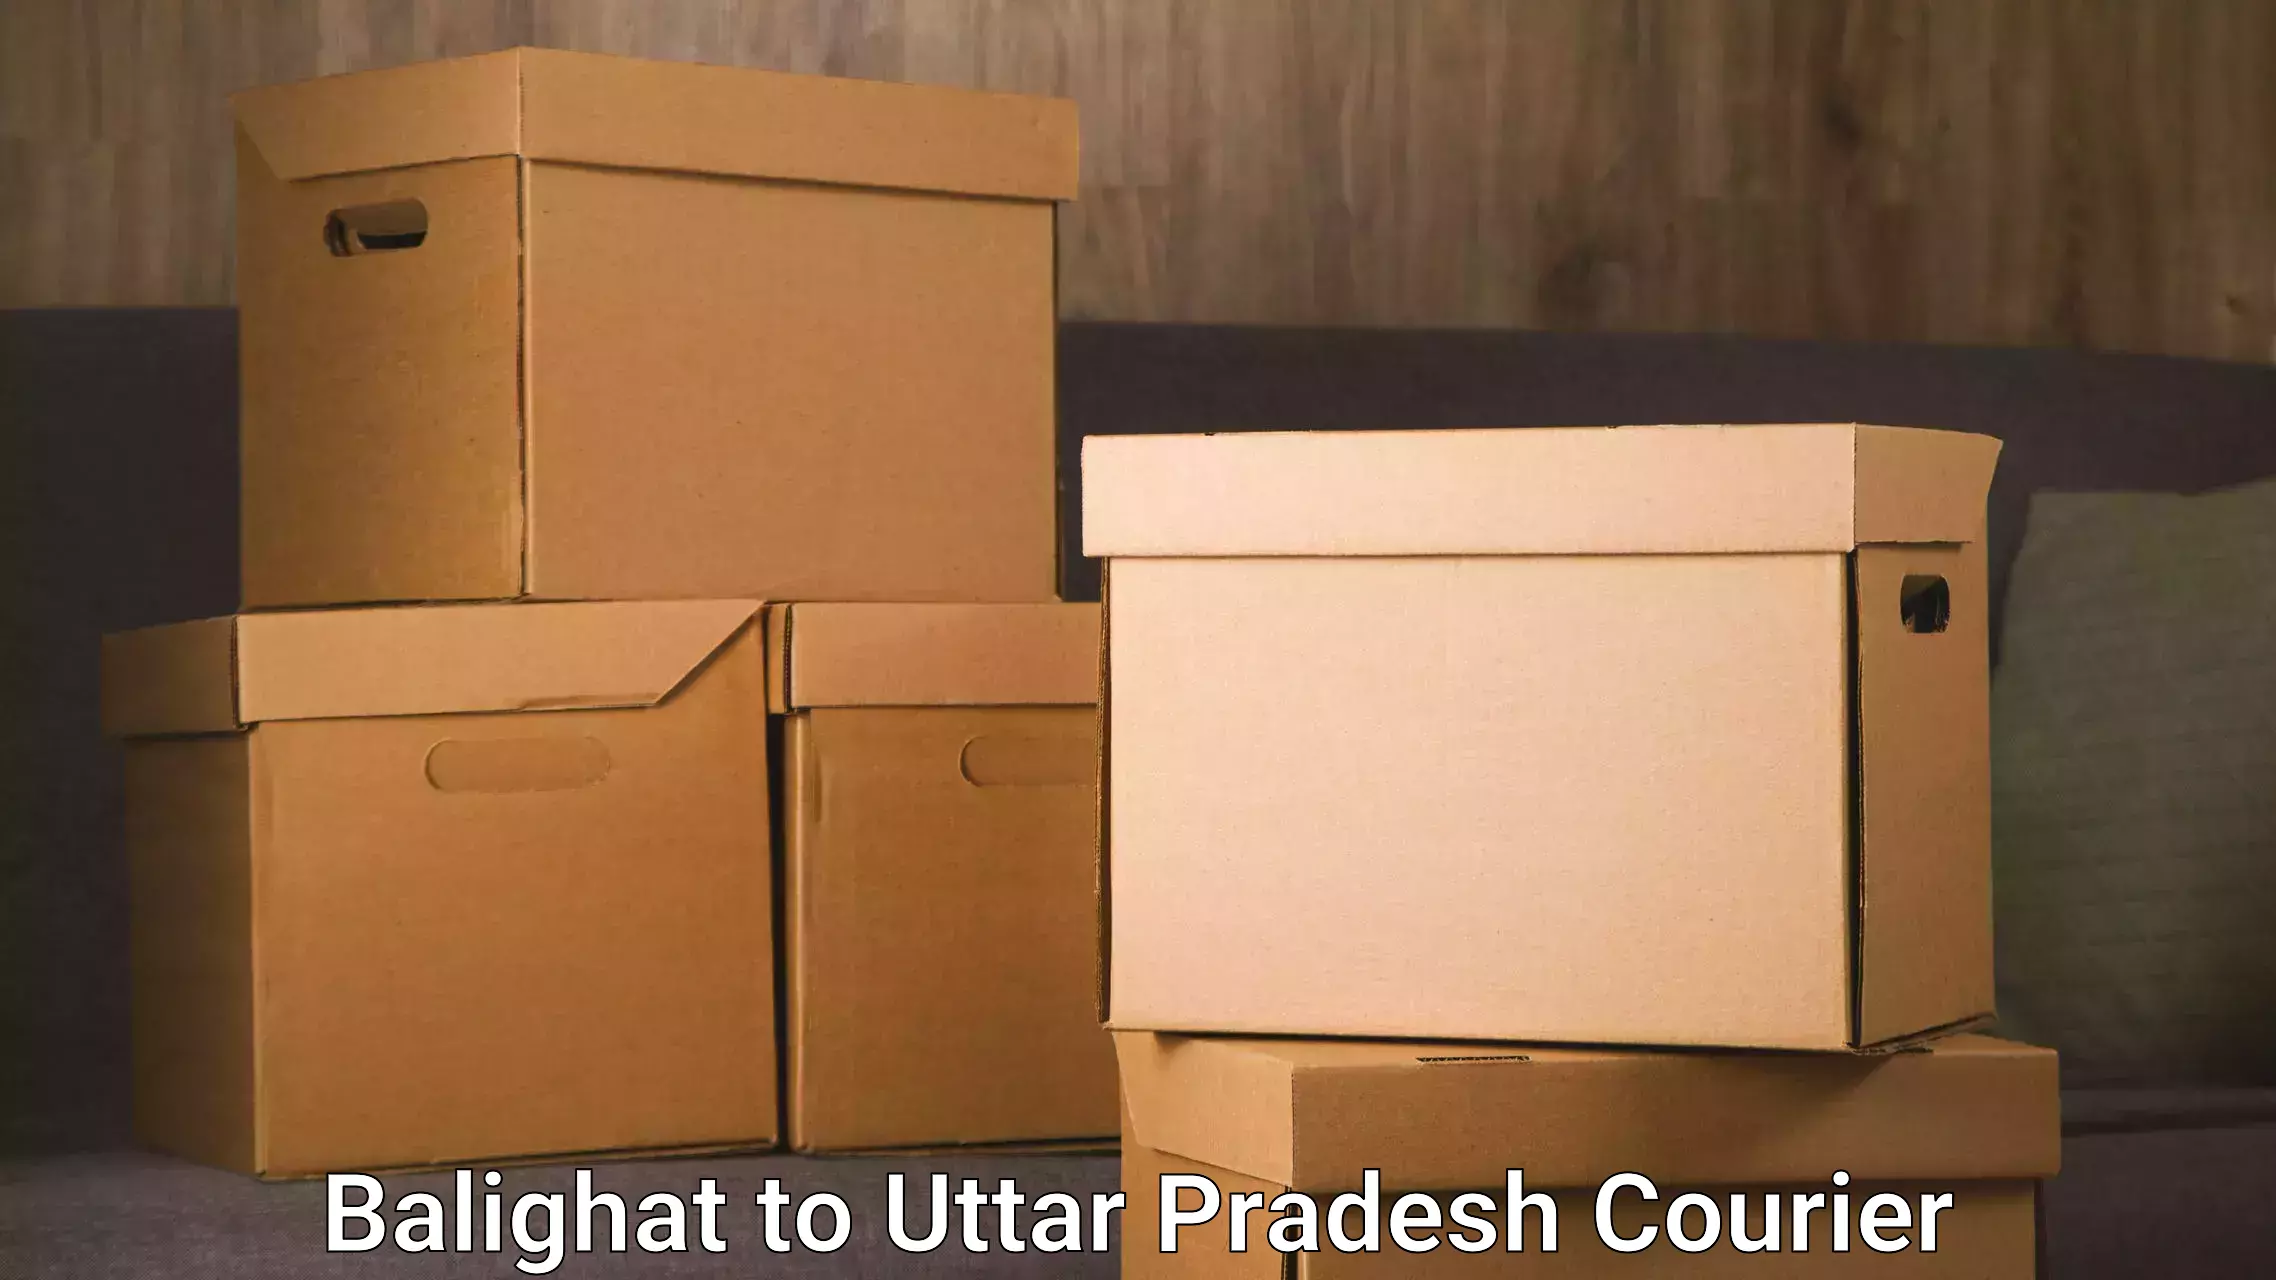 Urgent courier needs Balighat to Agra